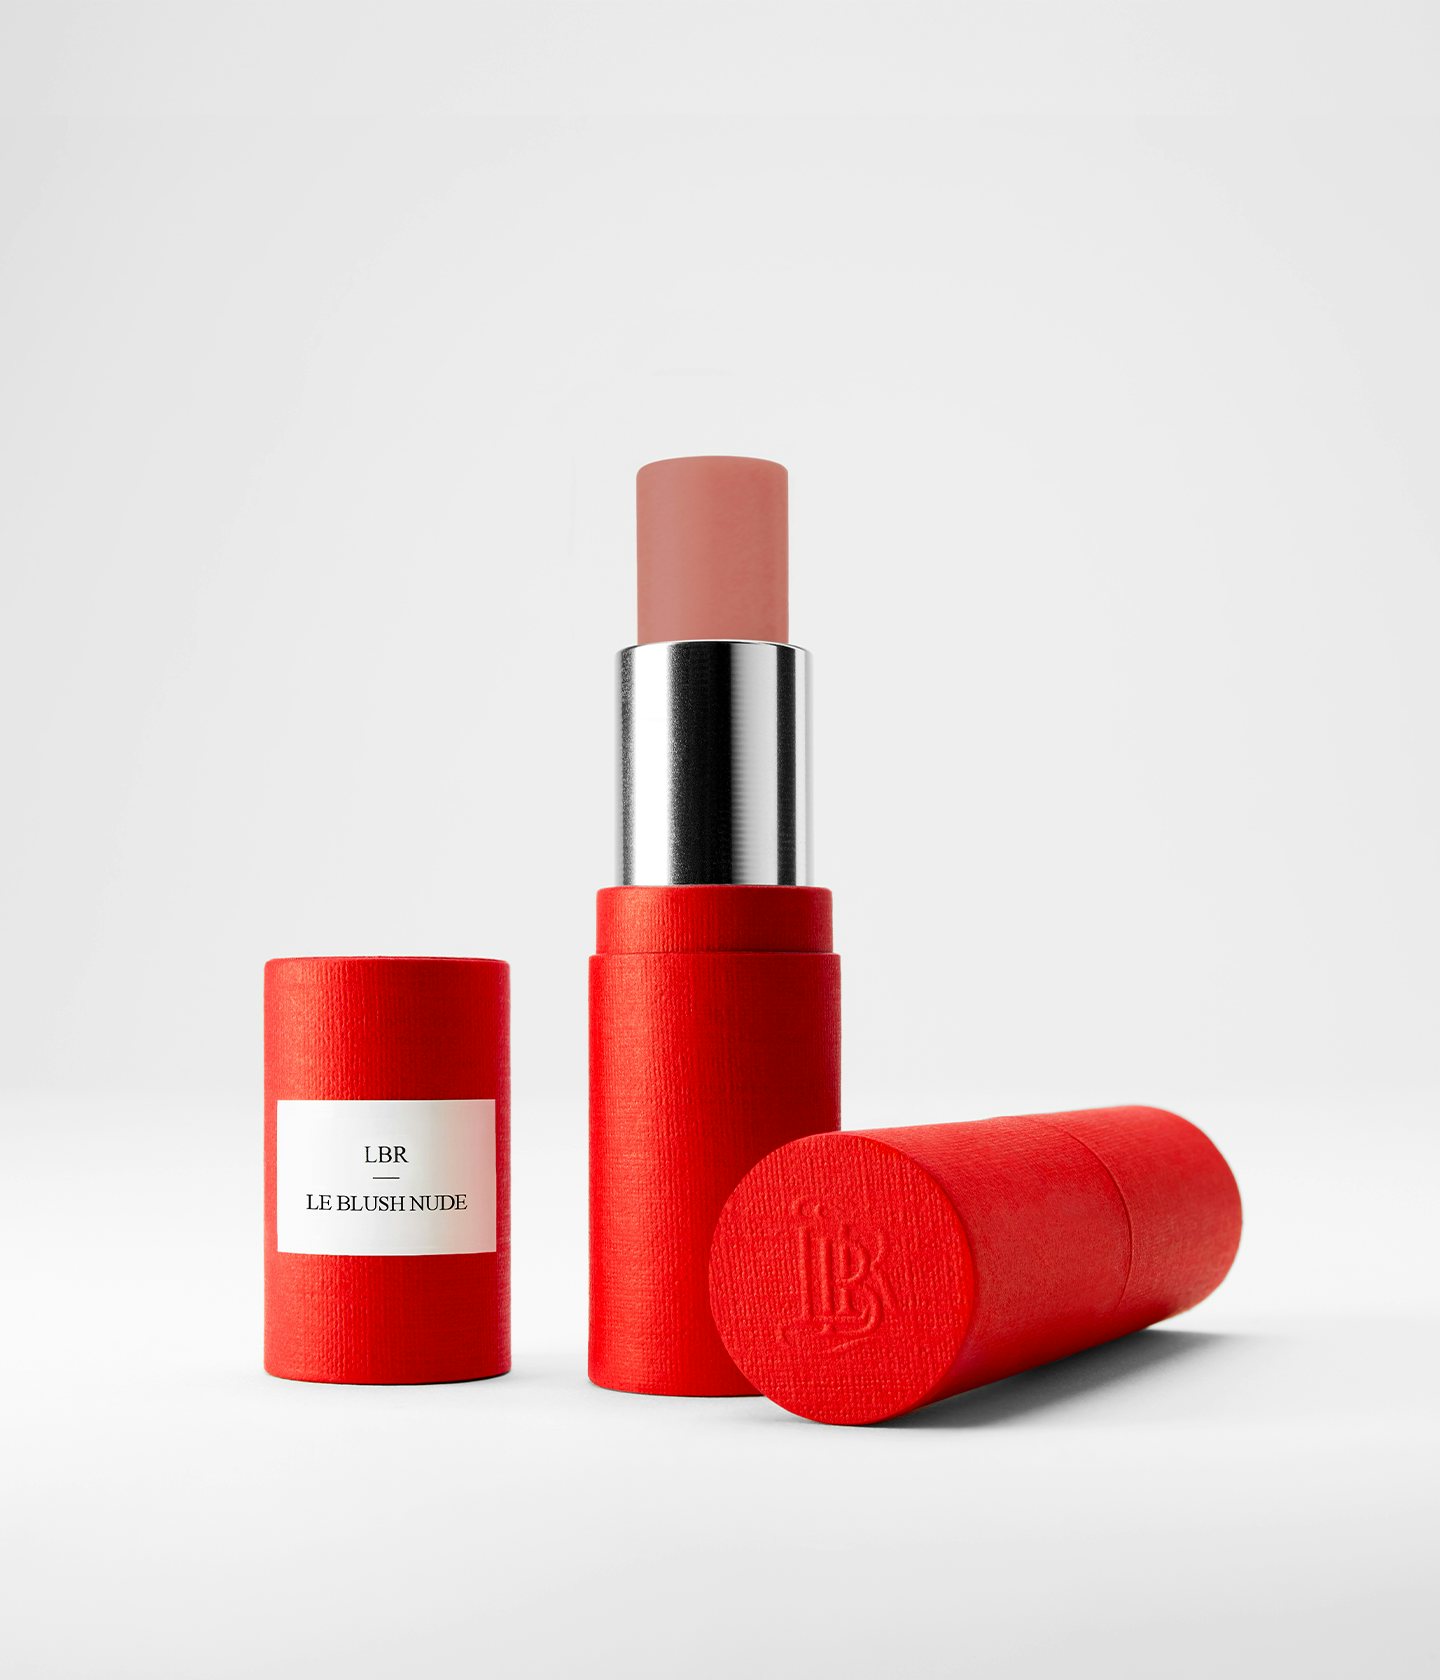 La bouche rouge The Nude Blush in the red paper case